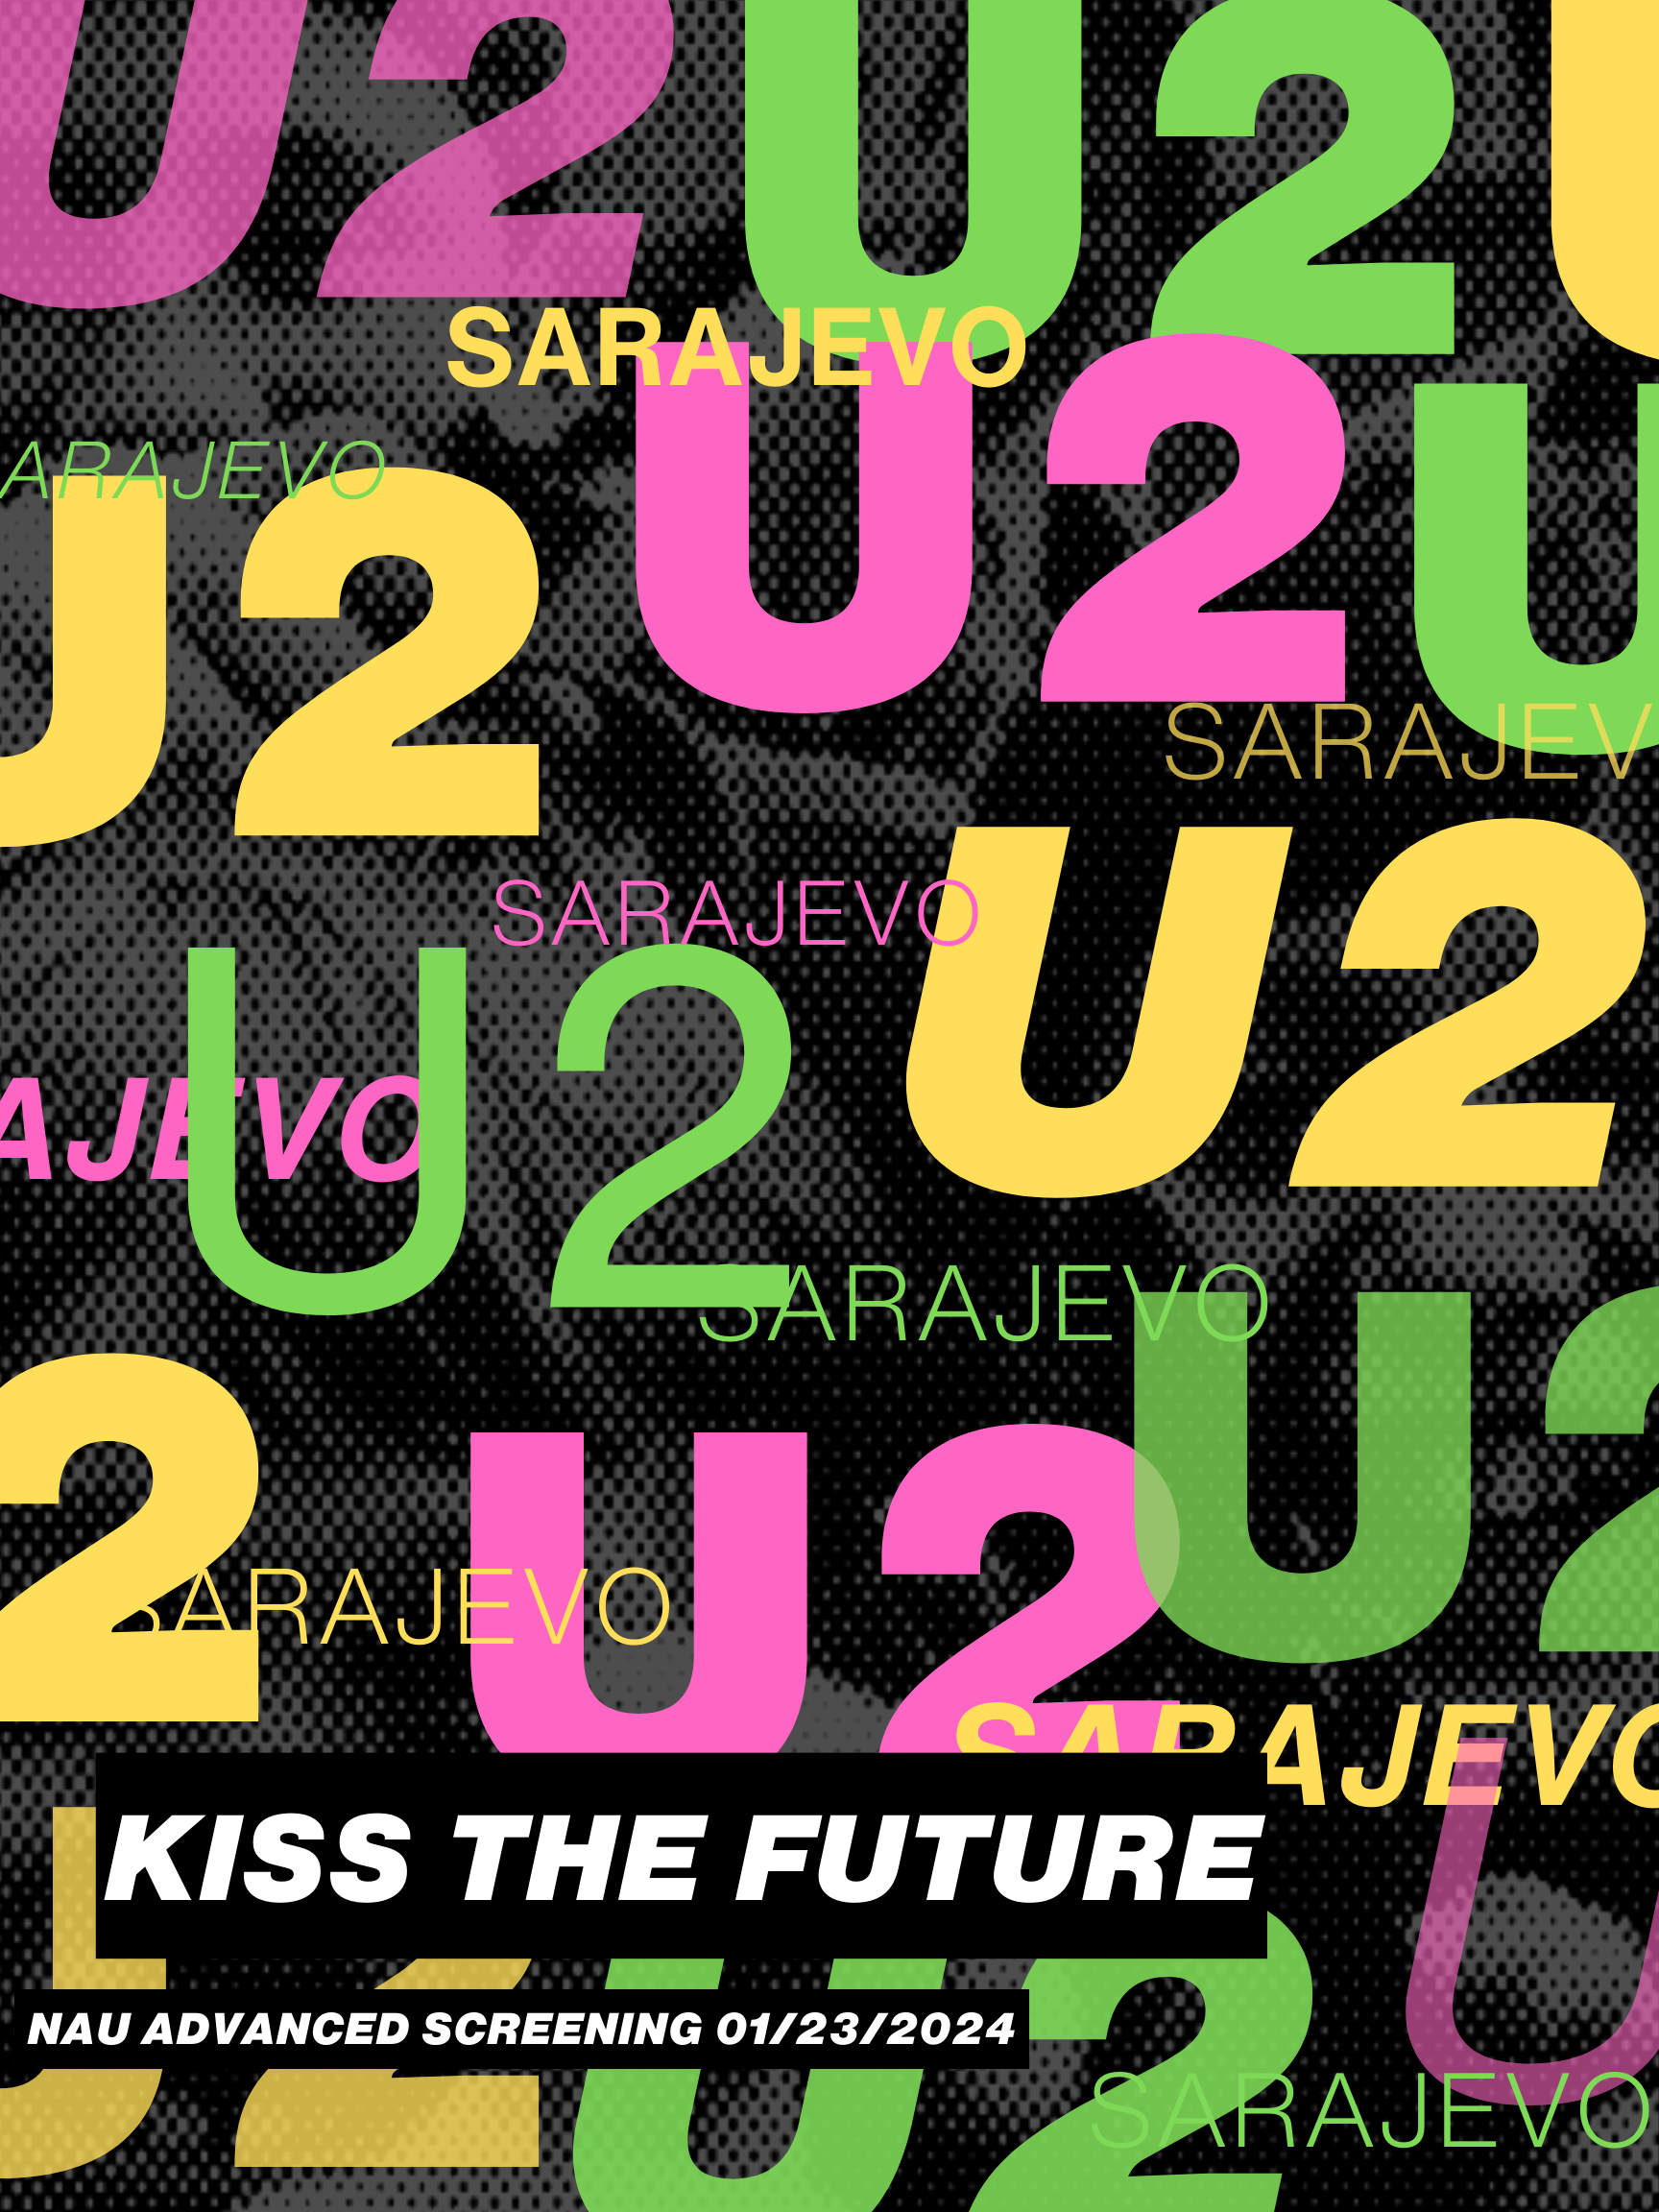 U2 Poster created by Elliott for special advanced screening - text U2 and Sarejevo in multiple colors on black